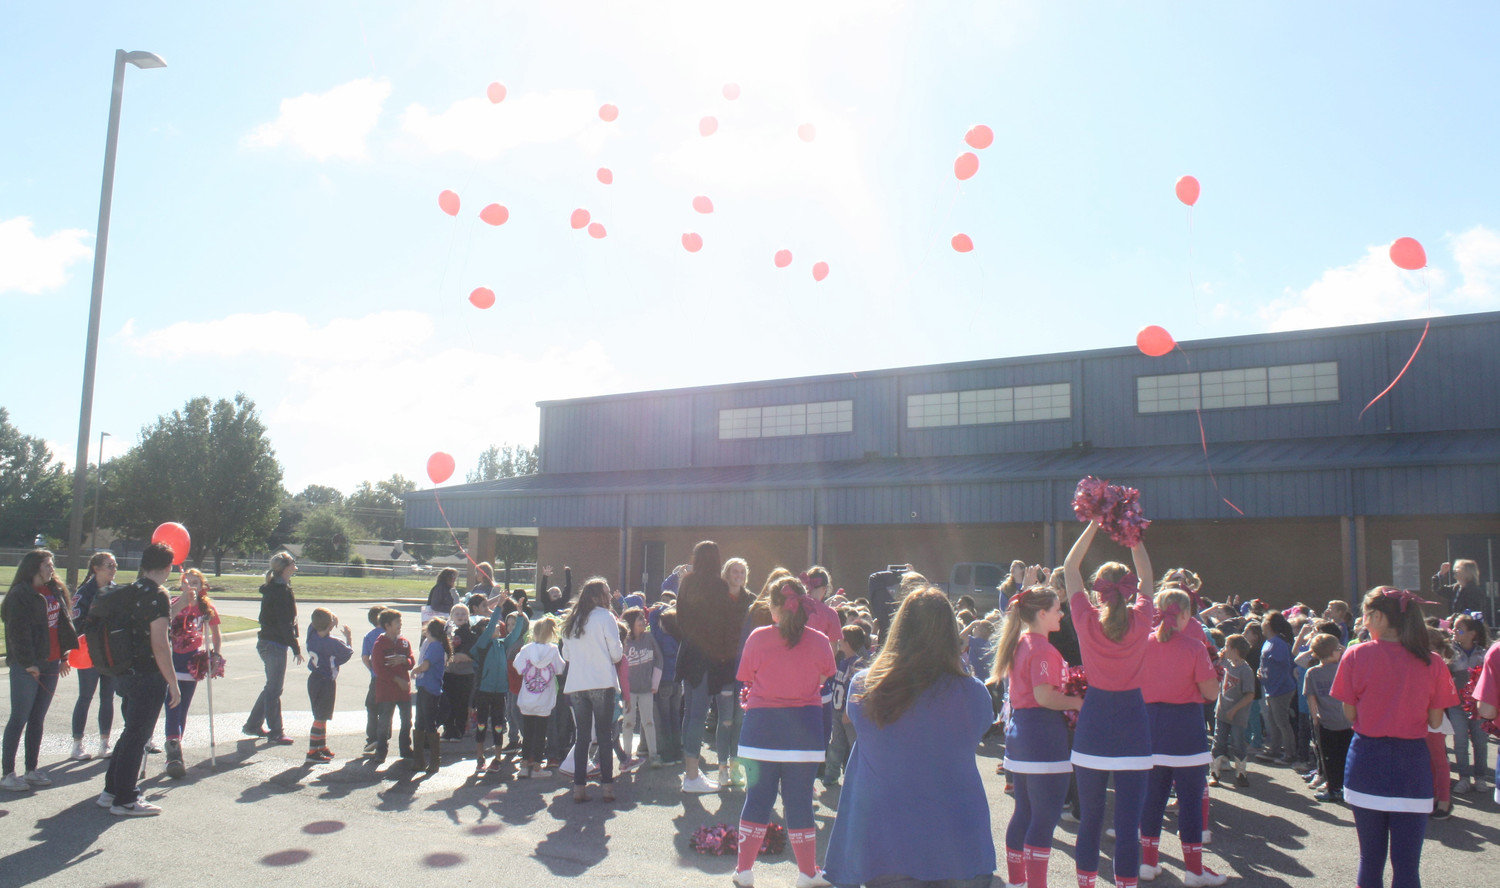 Quitman Elementary students release red balloons for Red Ribbon Week, which teaches kids about not using drugs, in the QES parking lot on Oct. 26. High school student leaders came to the elementary to lead the balloon release.  (Monitor photo by Zak Wellerman)